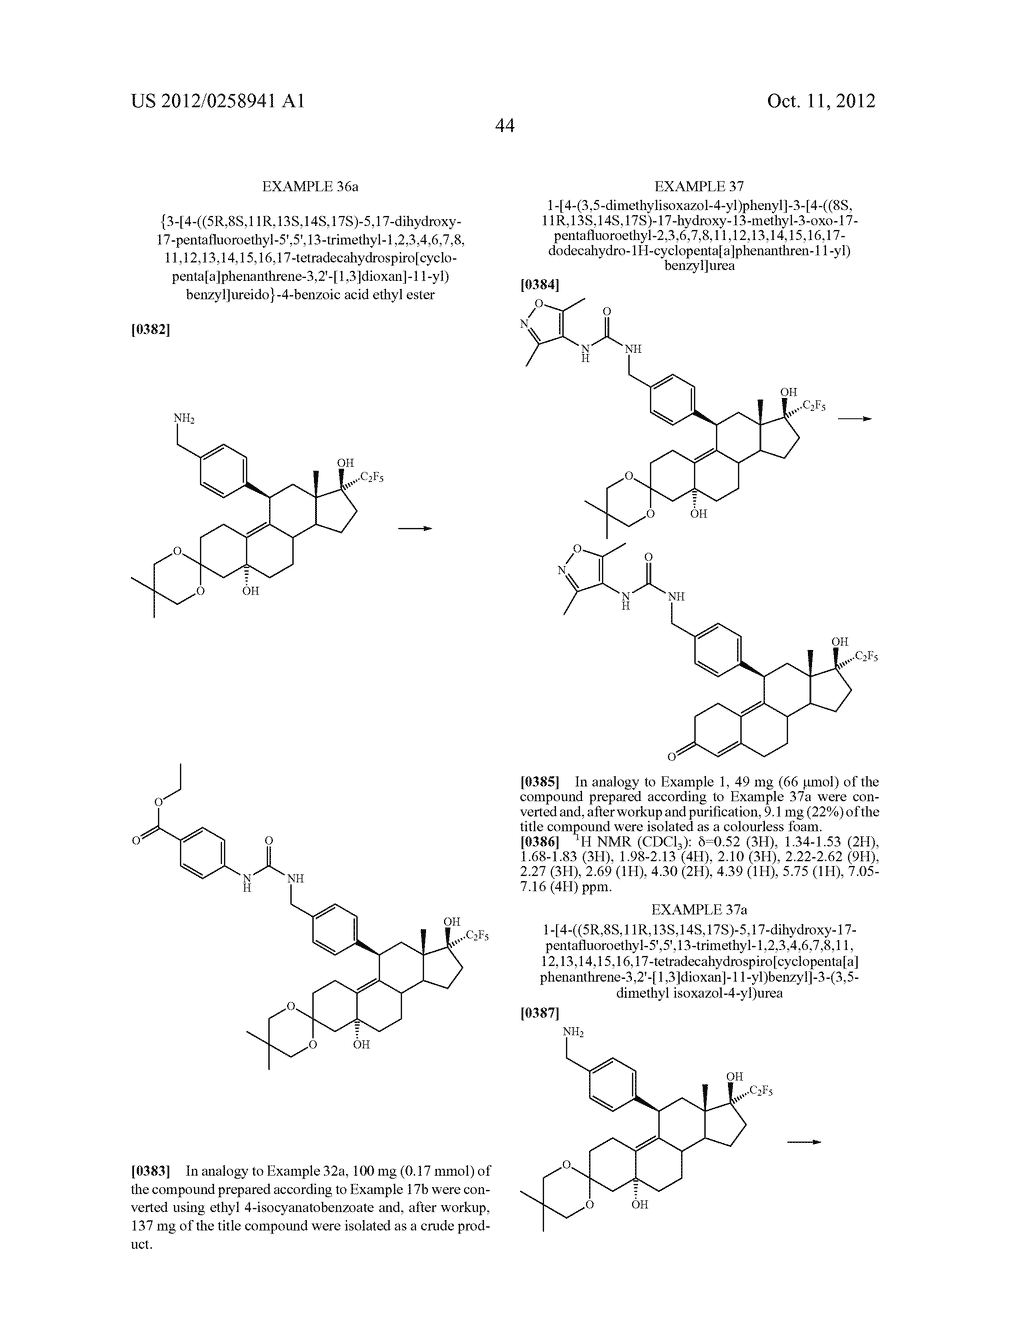 17-HYDROXY-17-PENTAFLUORETHYL-ESTRA-4,9(10)-DIEN-11-ARYL DERIVATIVES,     METHODS FOR THE PRODUCTION THEREOF AND THE USE THEREOF FOR TREATING     DISEASES - diagram, schematic, and image 45